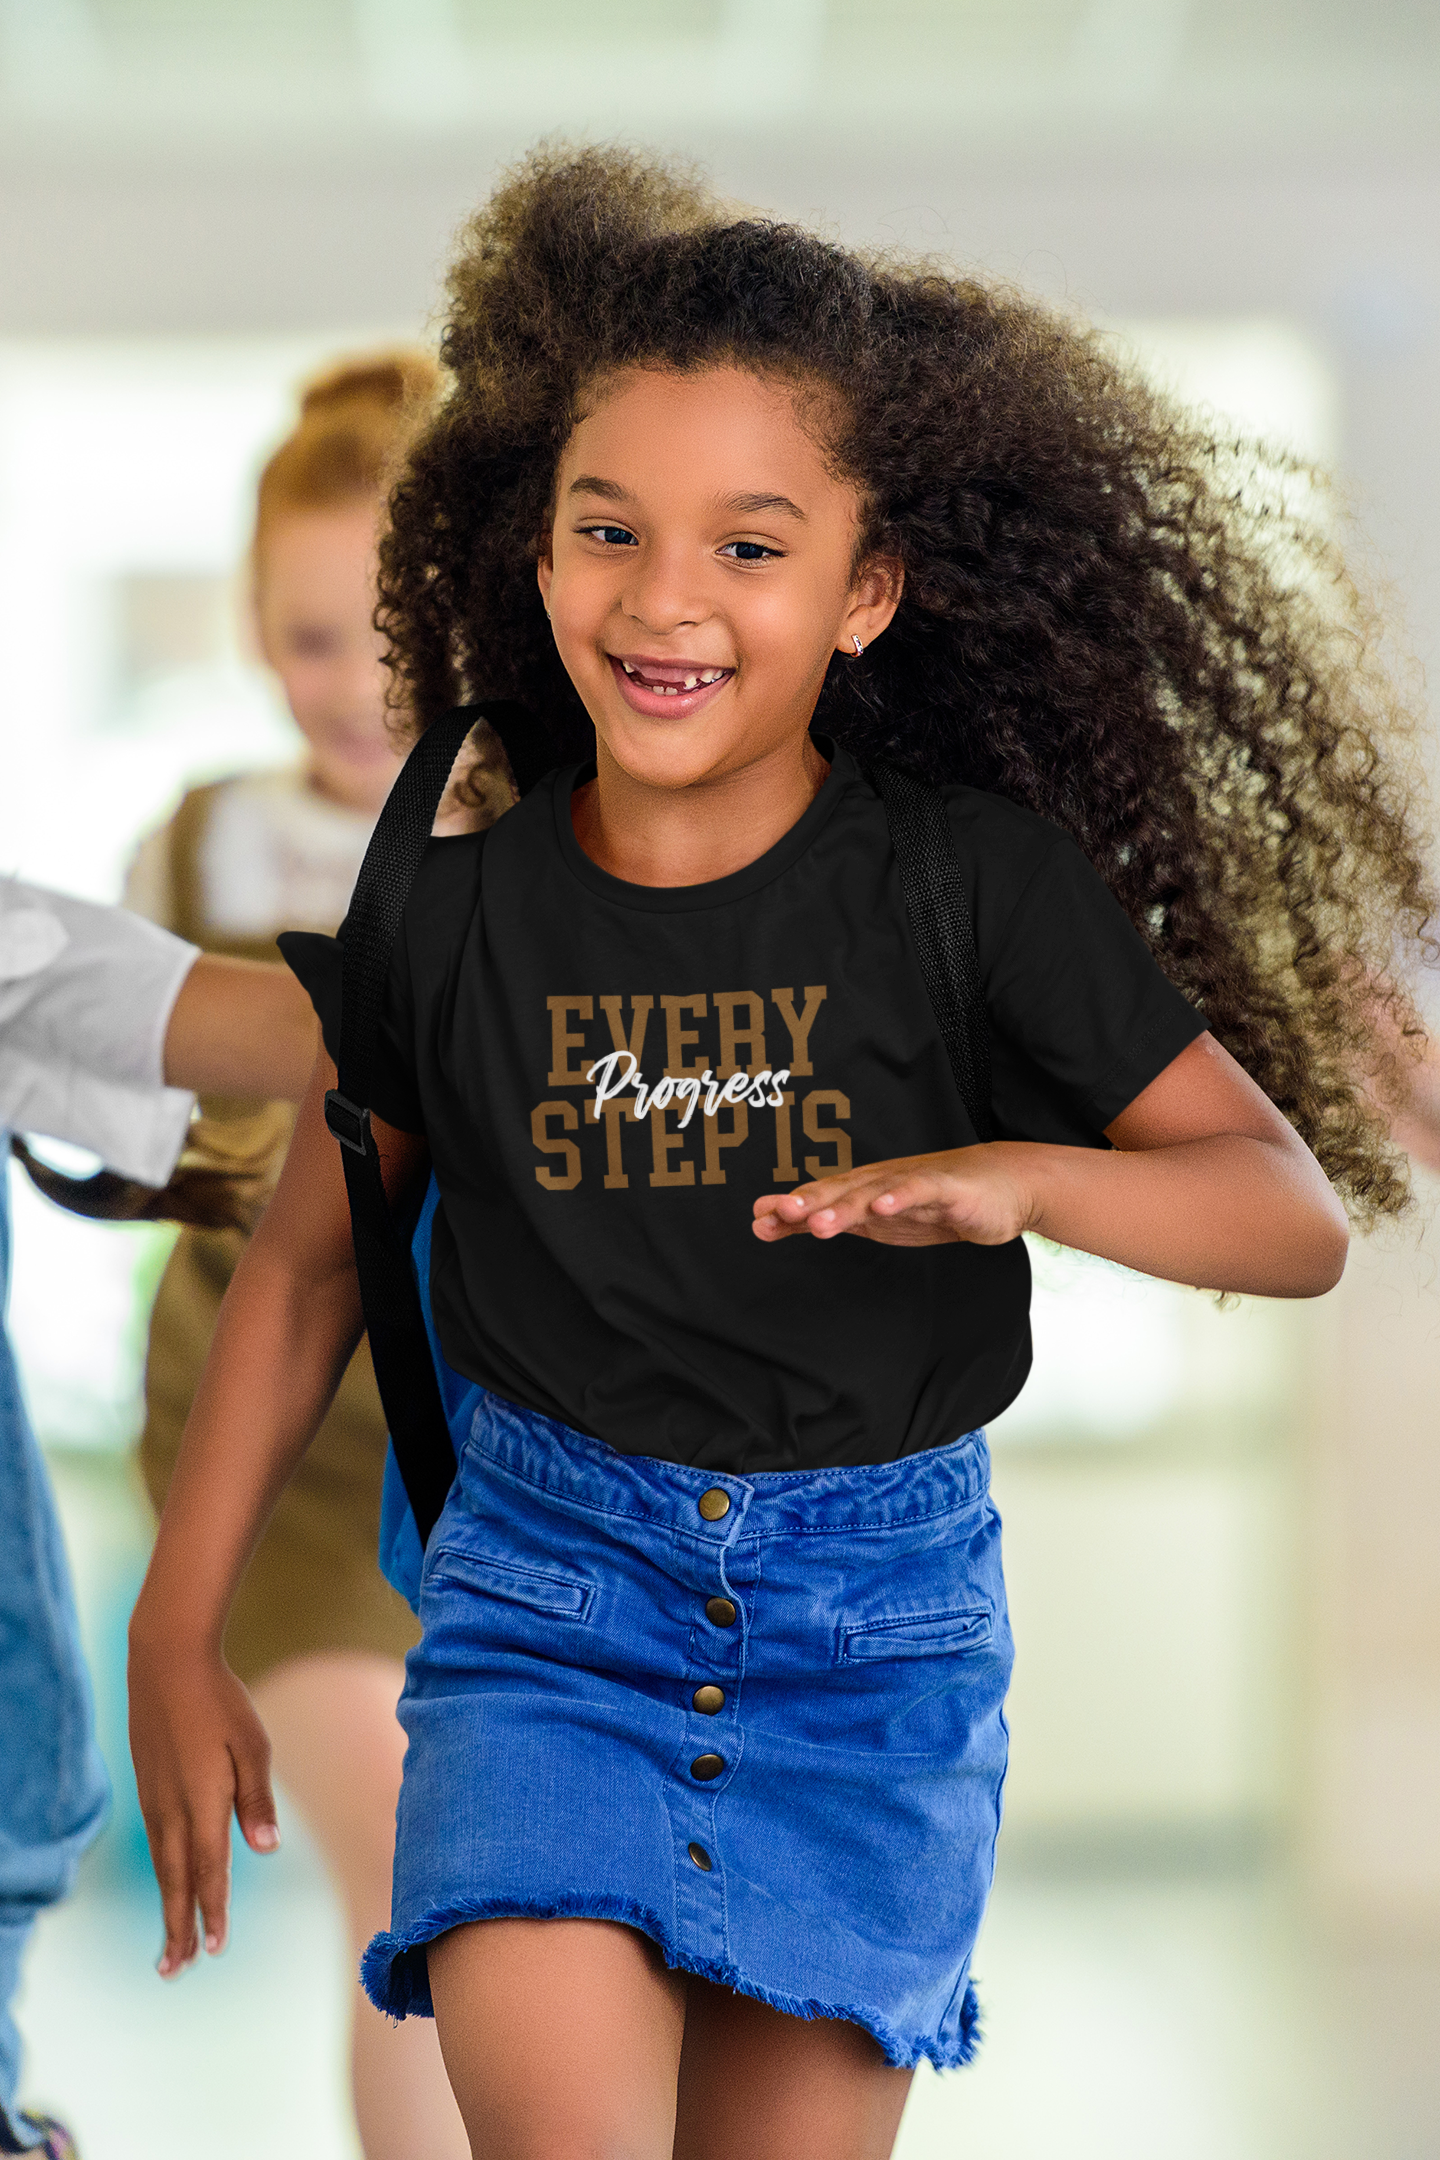 A girl wearing a Every Step is Progress Tee (Youth Size) from Sharp Tact Kreativ | Tees & Gifts with Encouraging Messages to Brighten Your Day with a Bit of Wit, that says every girl is special.